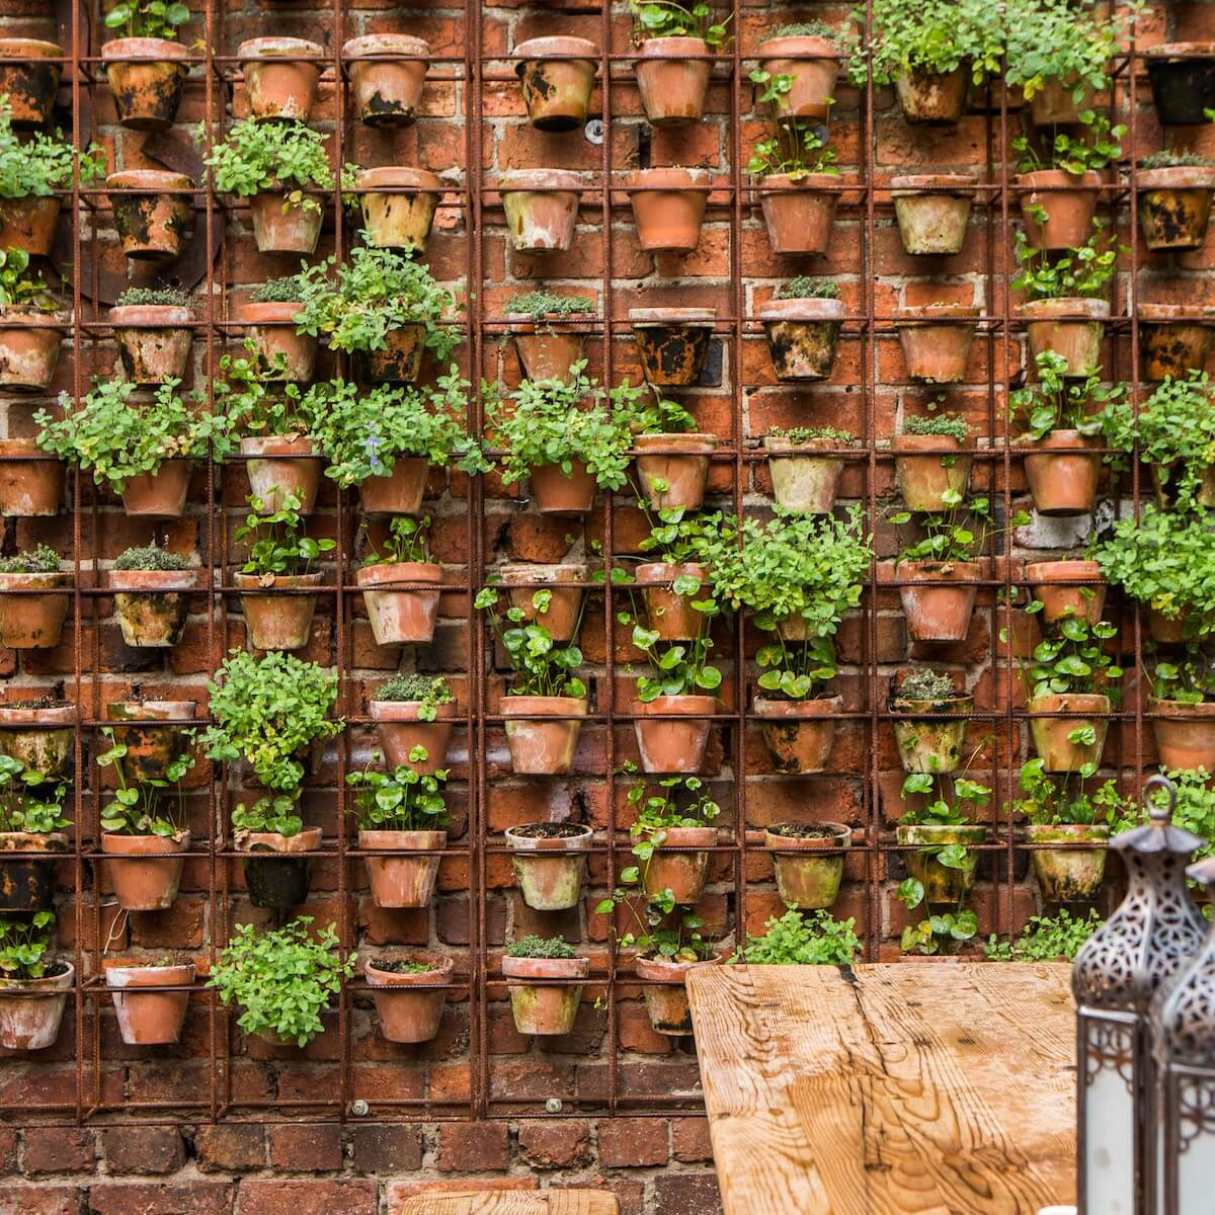 How To Decorate A Brick Wall In The Garden